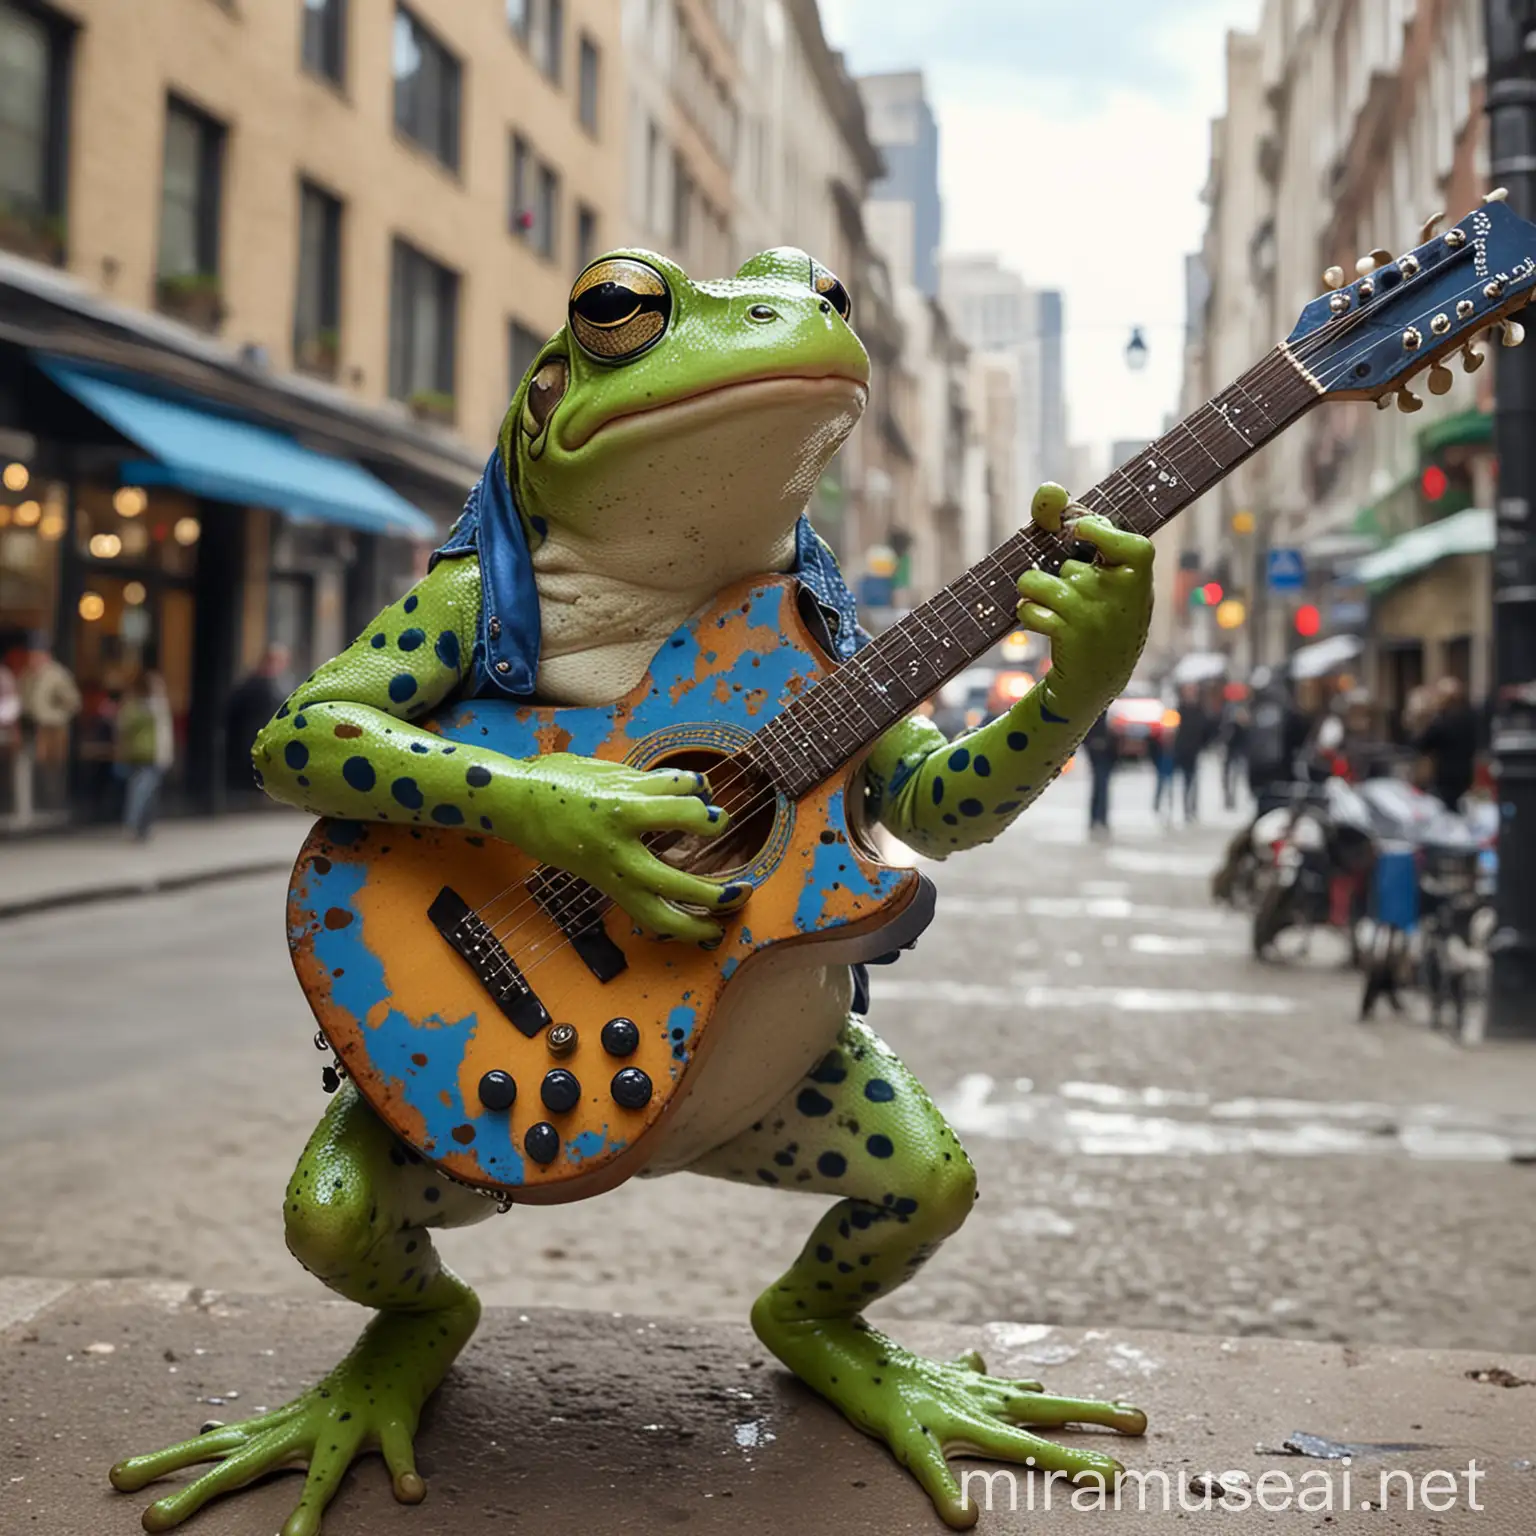 A green frog with blue spots, strumming an acoustic guitar, in a busy city